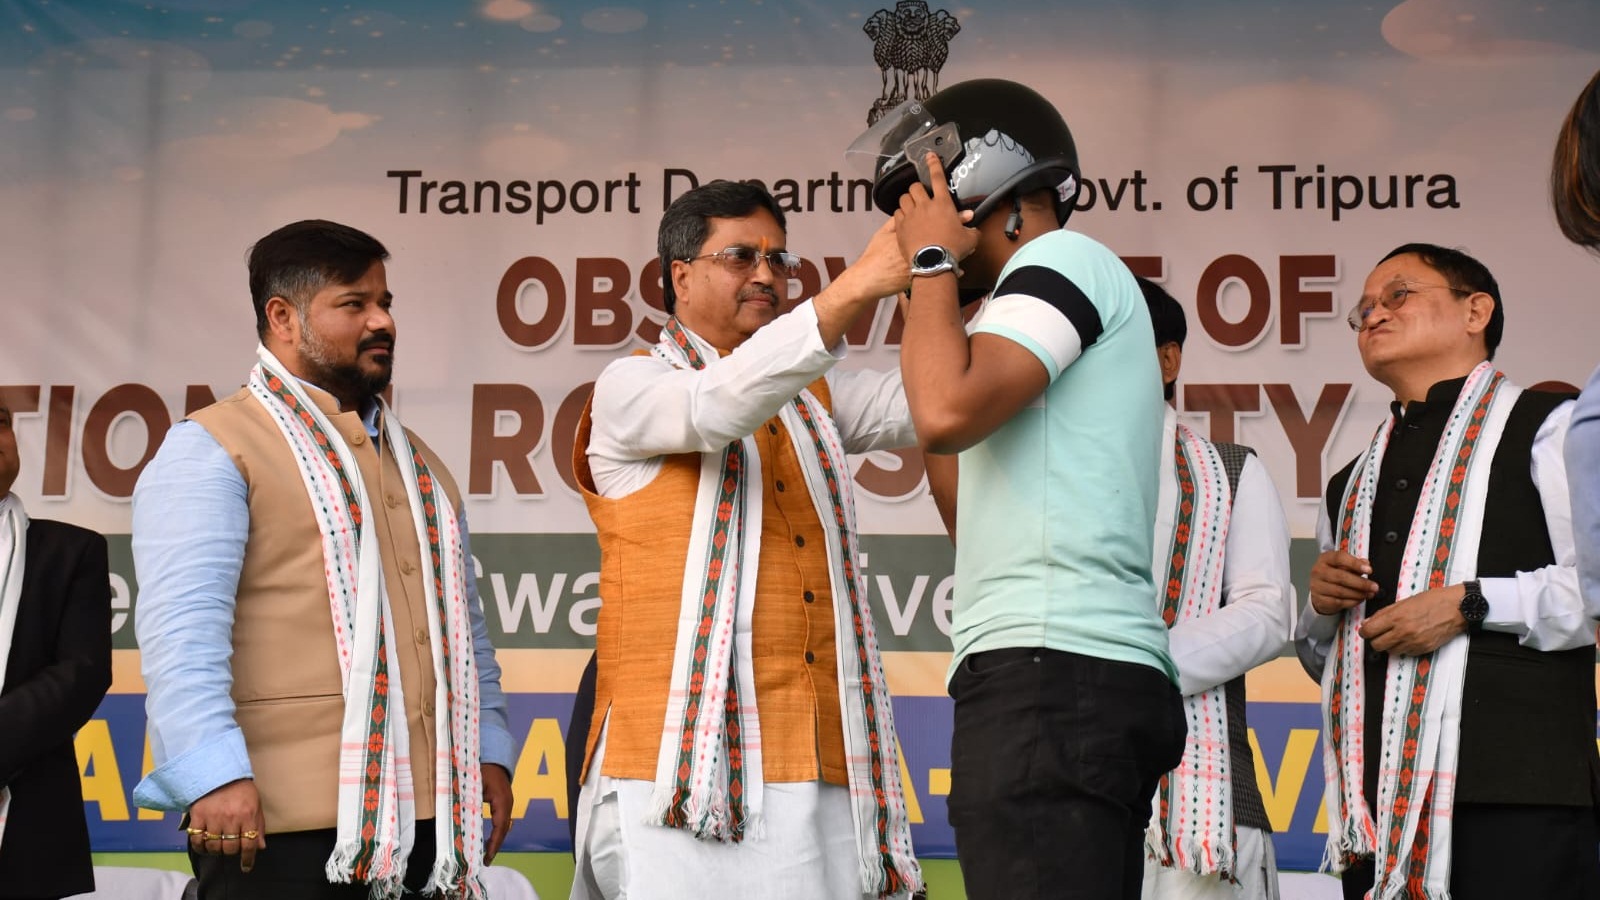 Govt using modern technology to ensure road safety, says Tripura chief minister